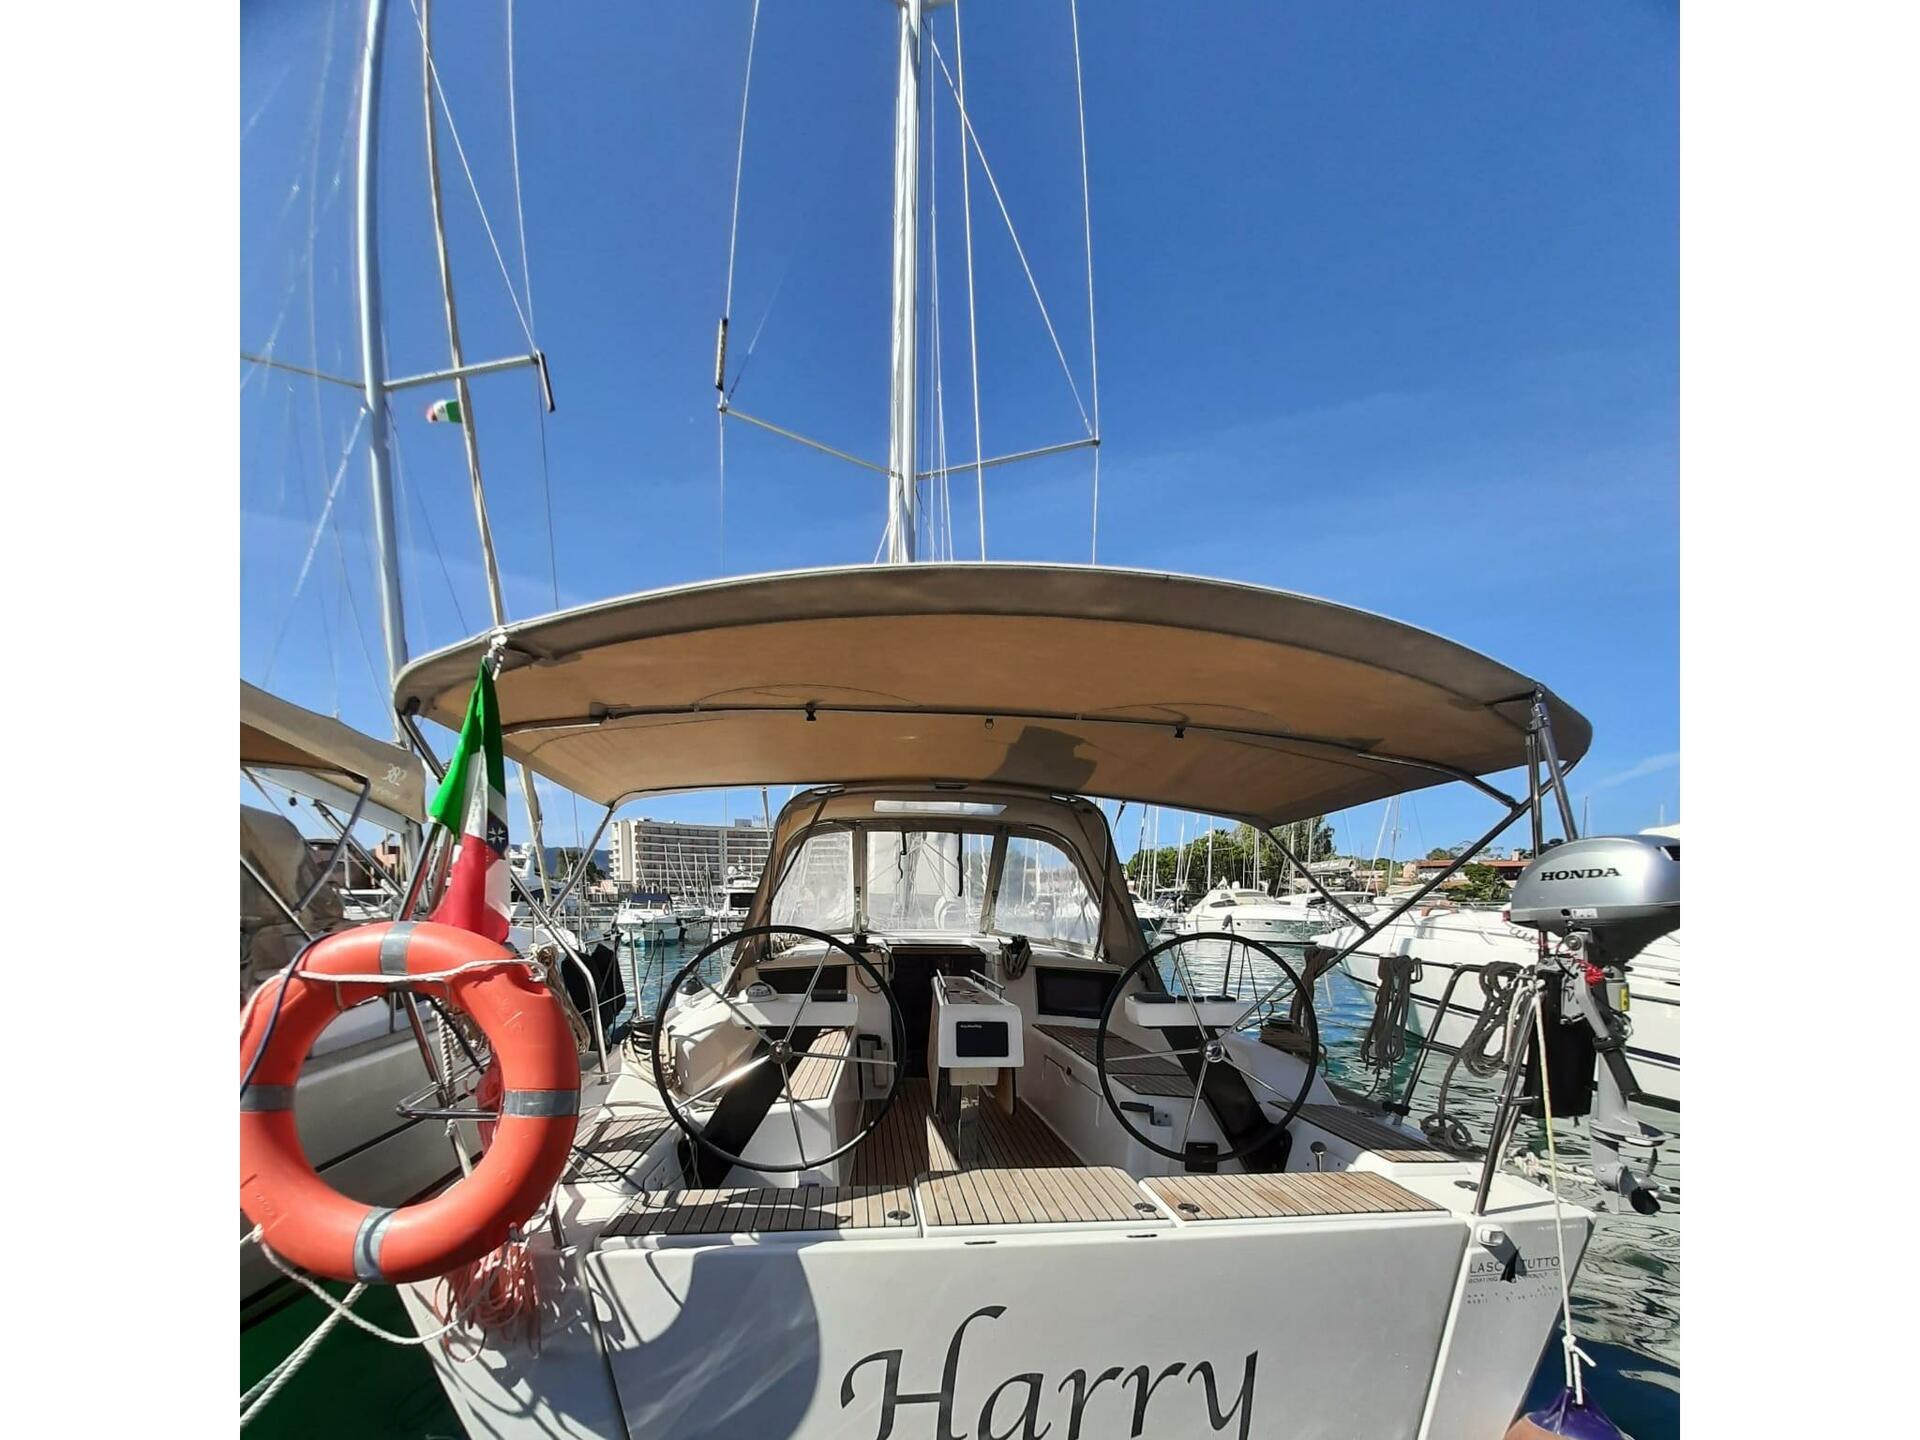 Harry | Dufour 360 grand large